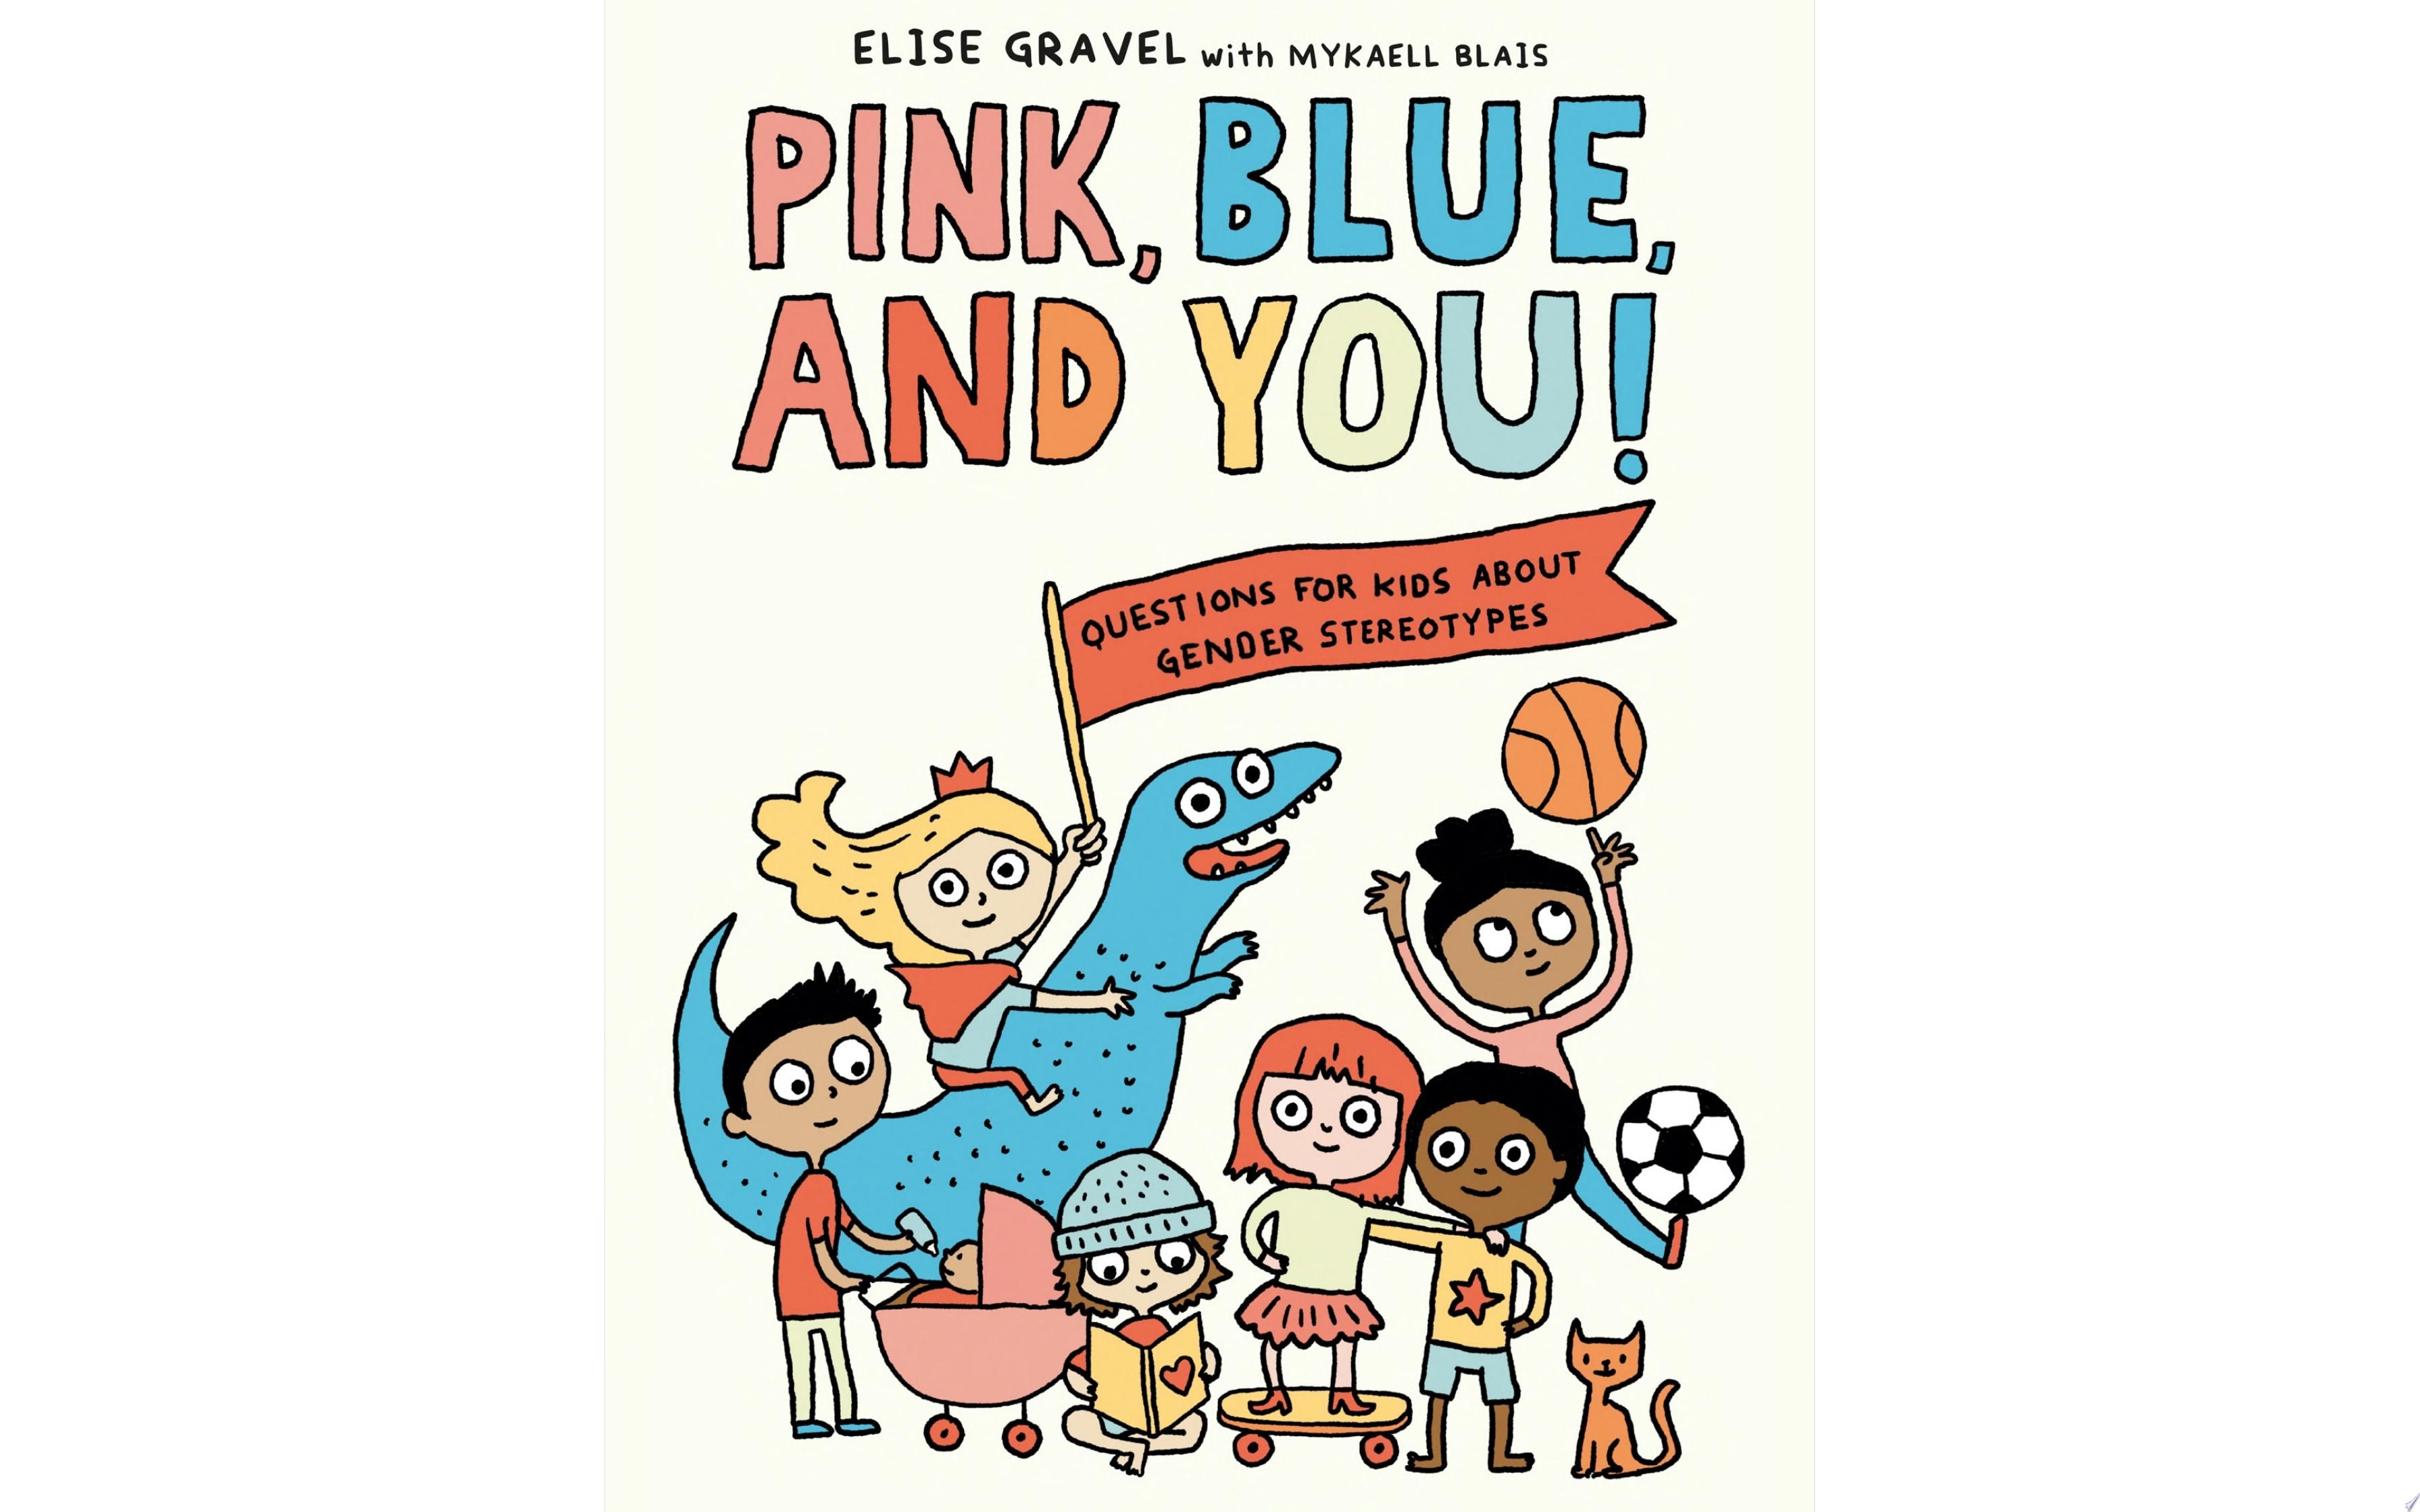 Image for "Pink, Blue, and You!"